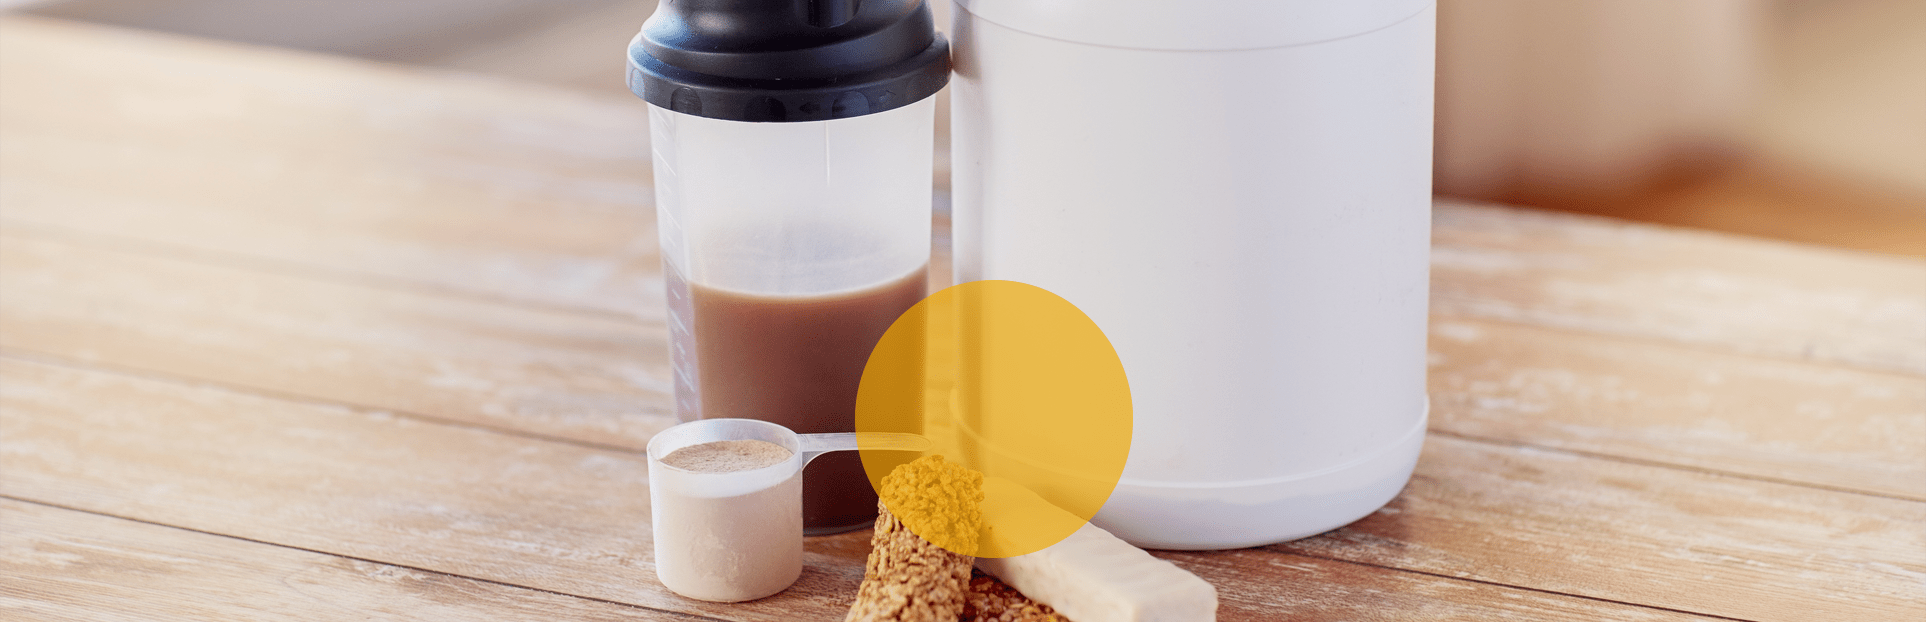 protein drinks, bars and powder